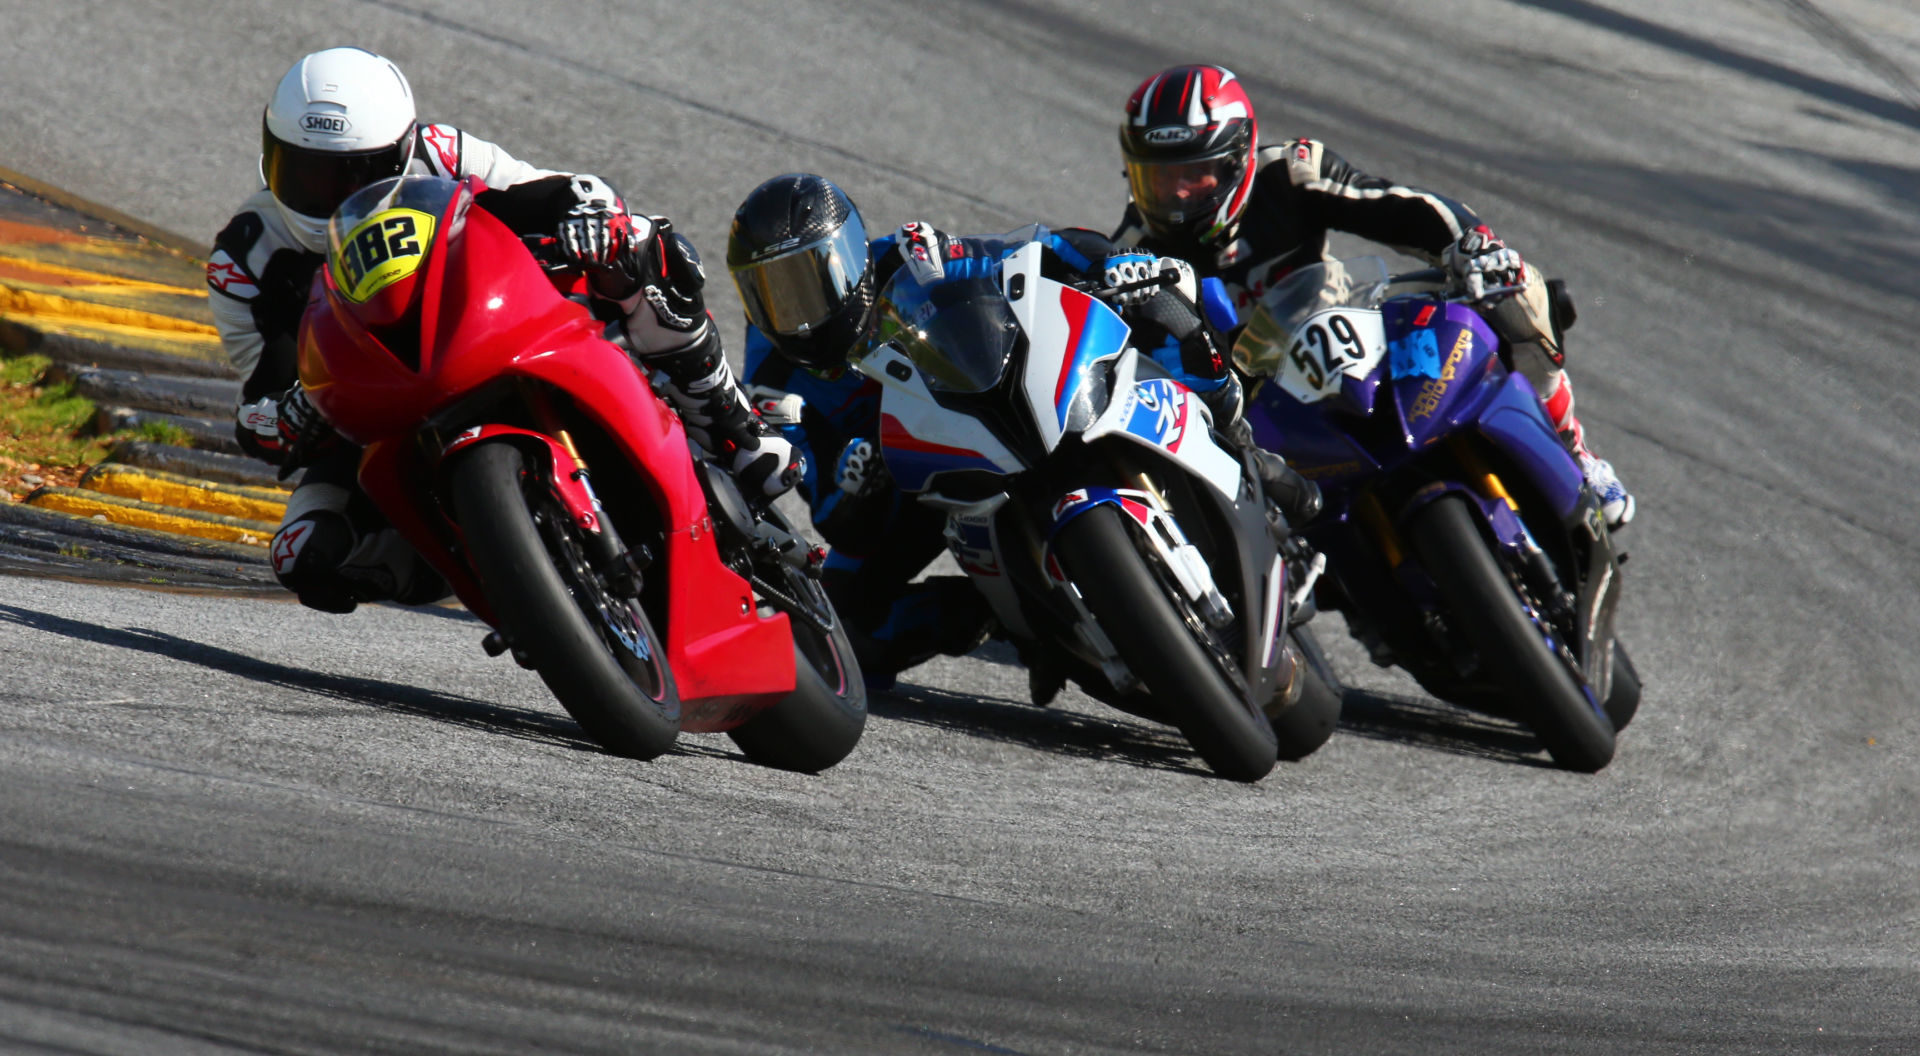 Participants in action during a Sportbike Track Time track day at Road Atlanta. Photo by 129photos.com, courtesy Sportbike Track Time.